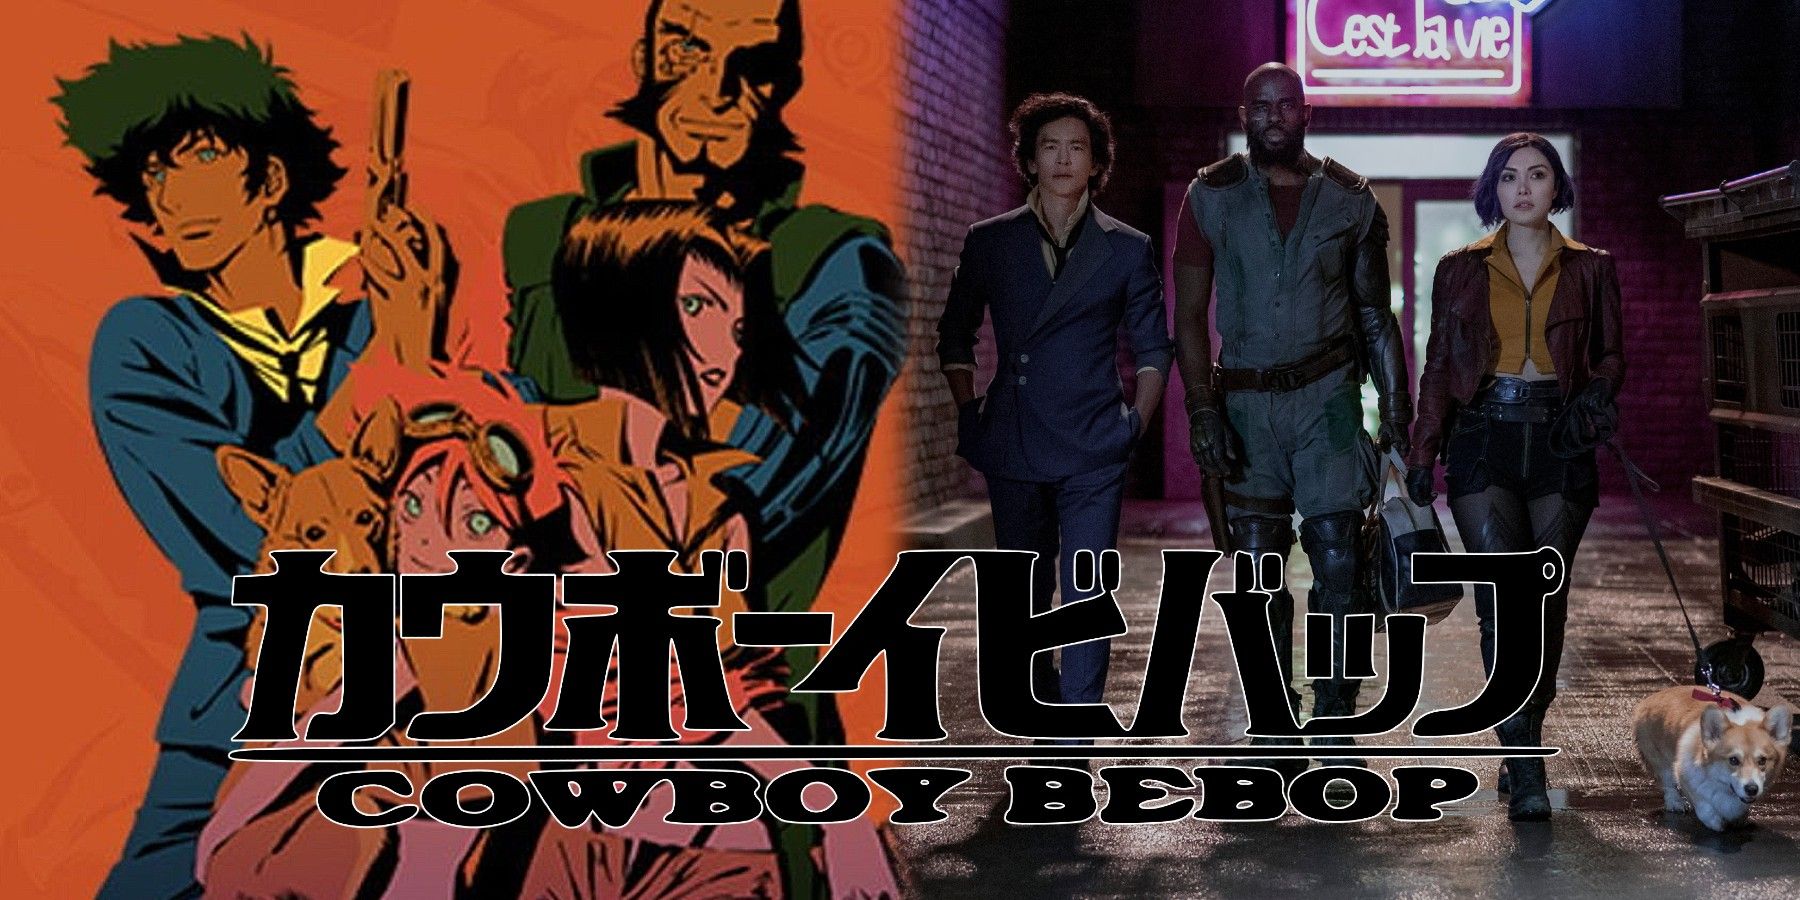 is there any new stuff planned for the cowboy bebop series